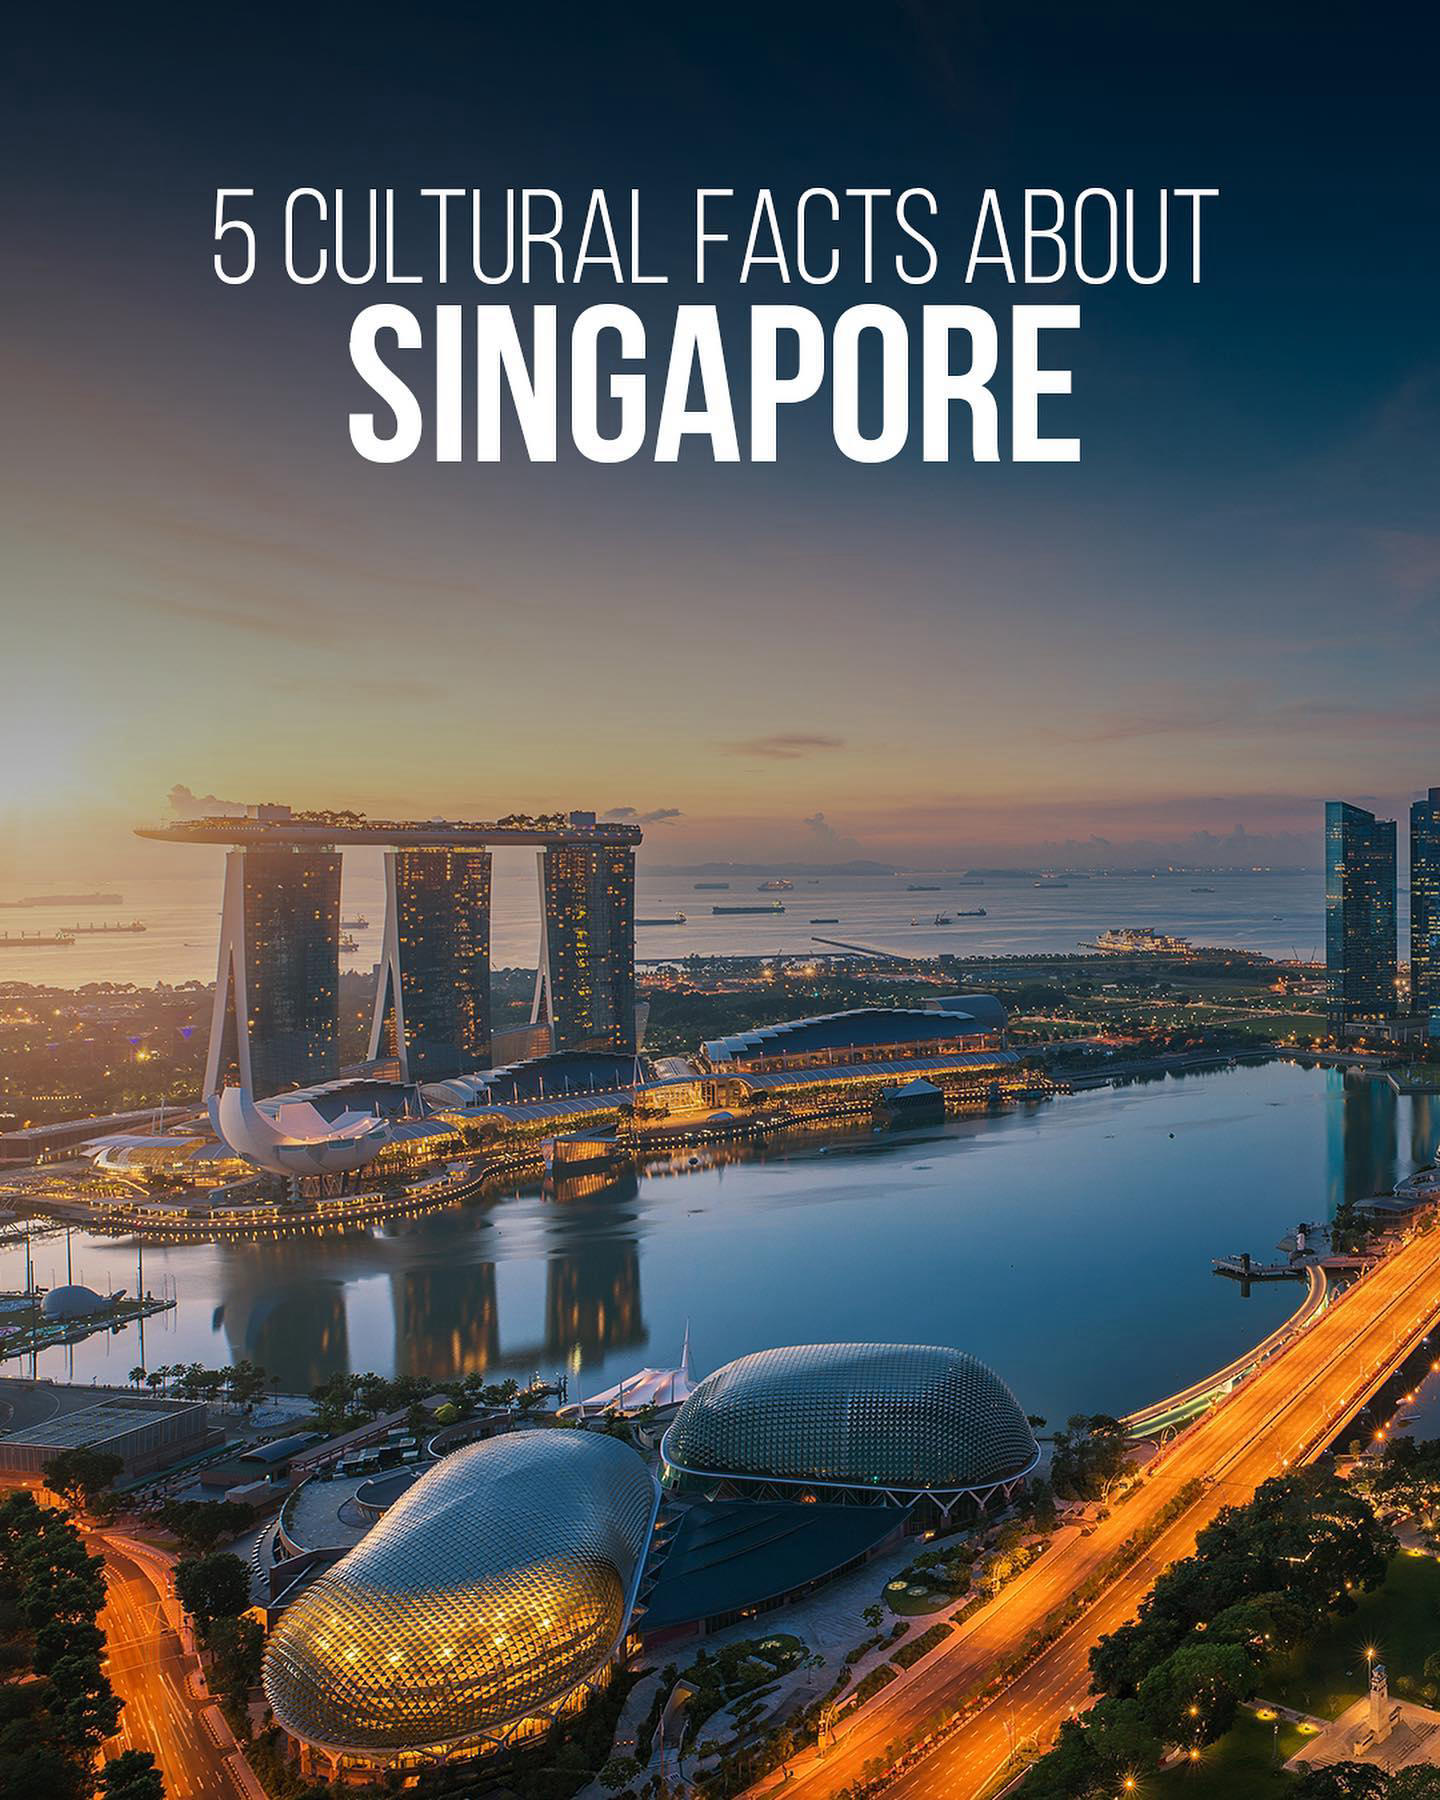 Singapore 🇸🇬 Travel | Hotels | Food | Tips - To create even more unforgettable memories in The Lio